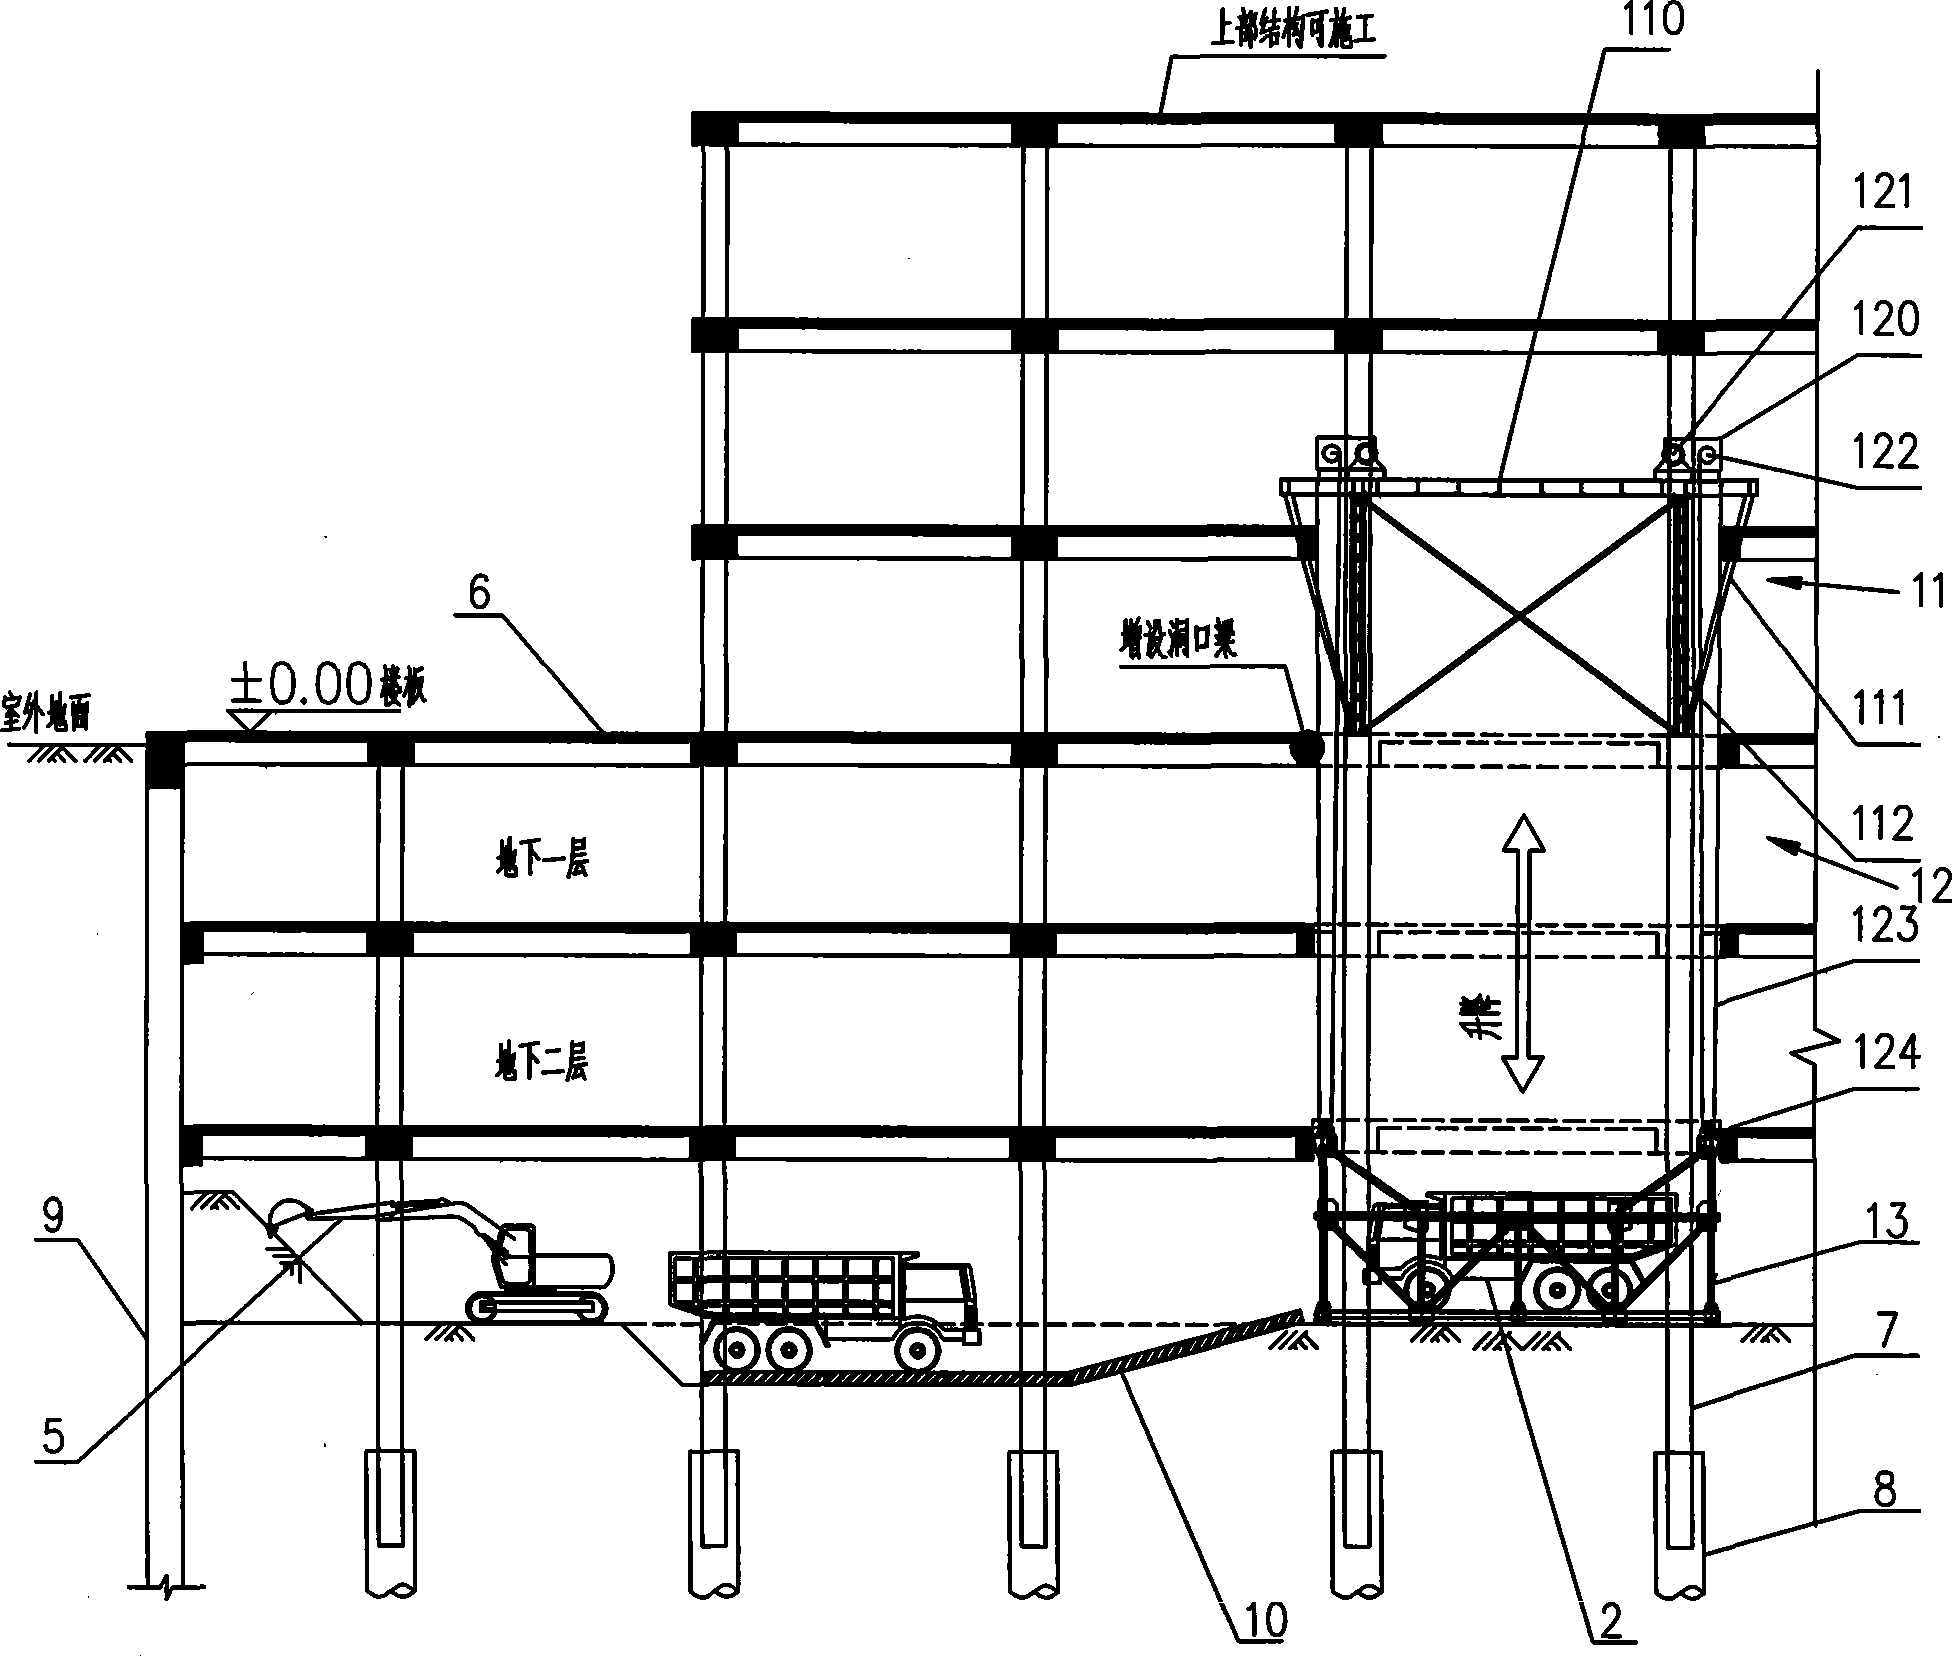 Elevator for deep foundation pit excavation by inverse construction method, and excavation system and method